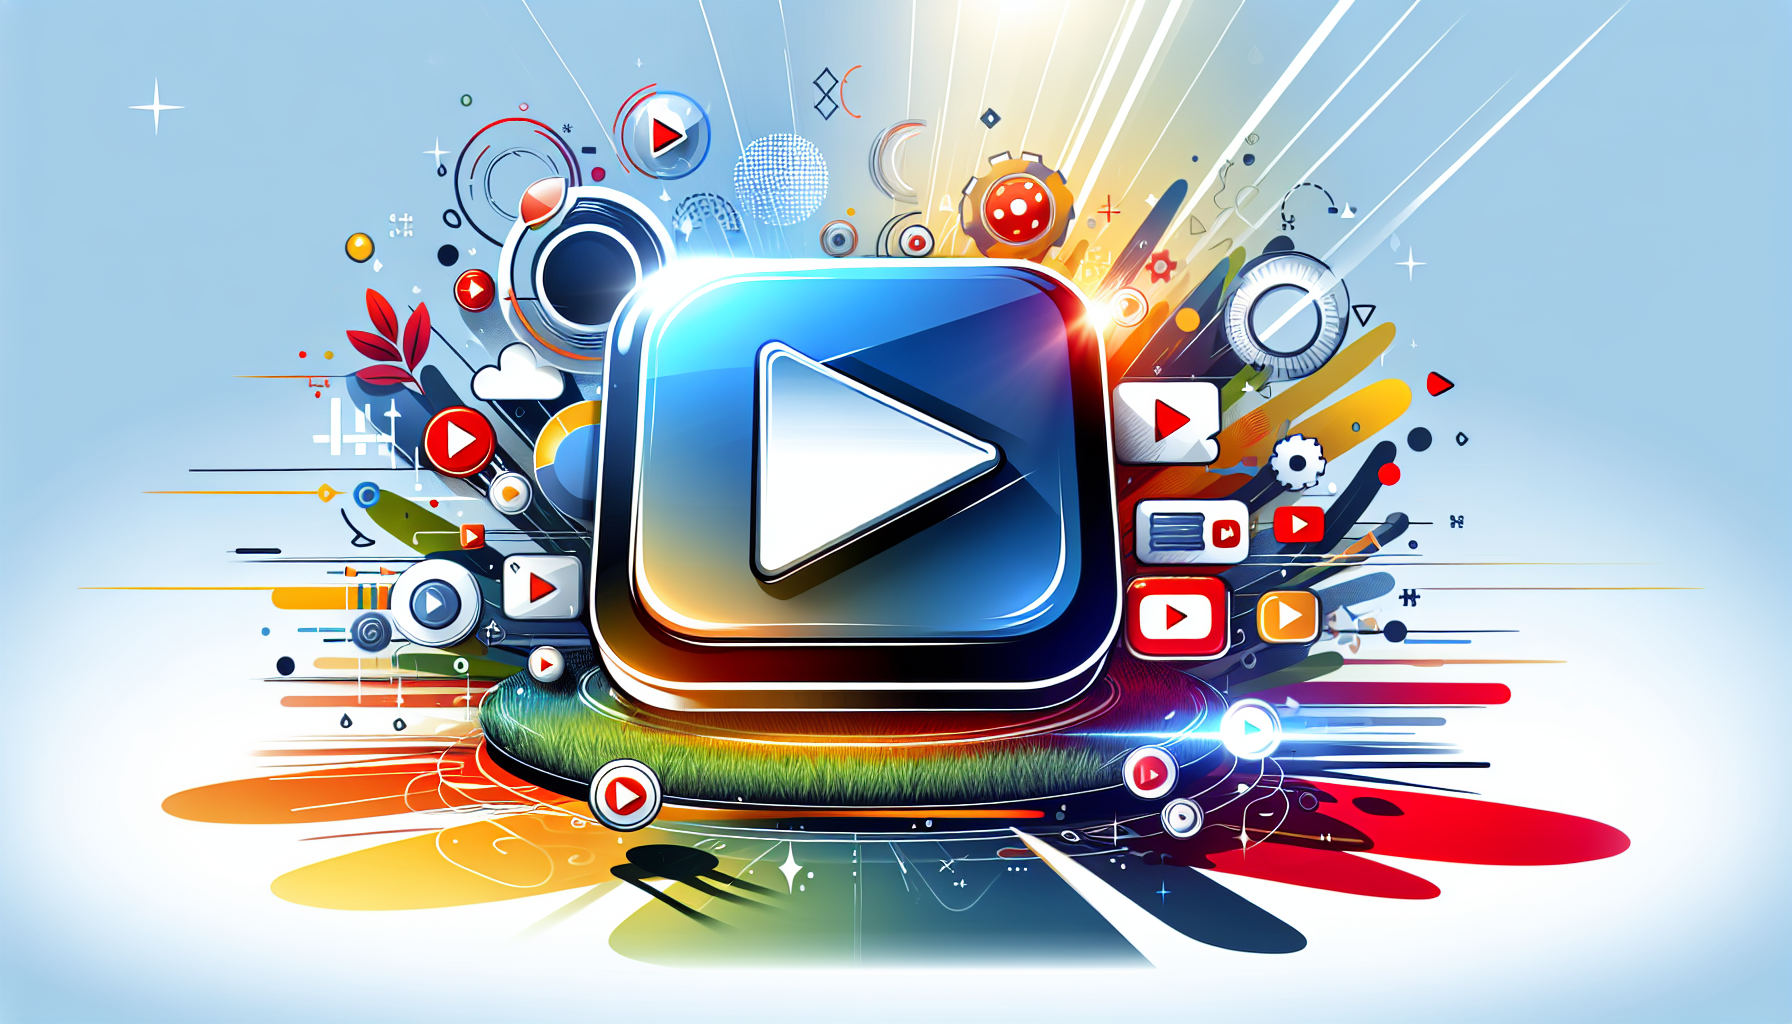 Video Content Considerations. Illustration of a play button symbolizing video content considerations for homepage SEO.